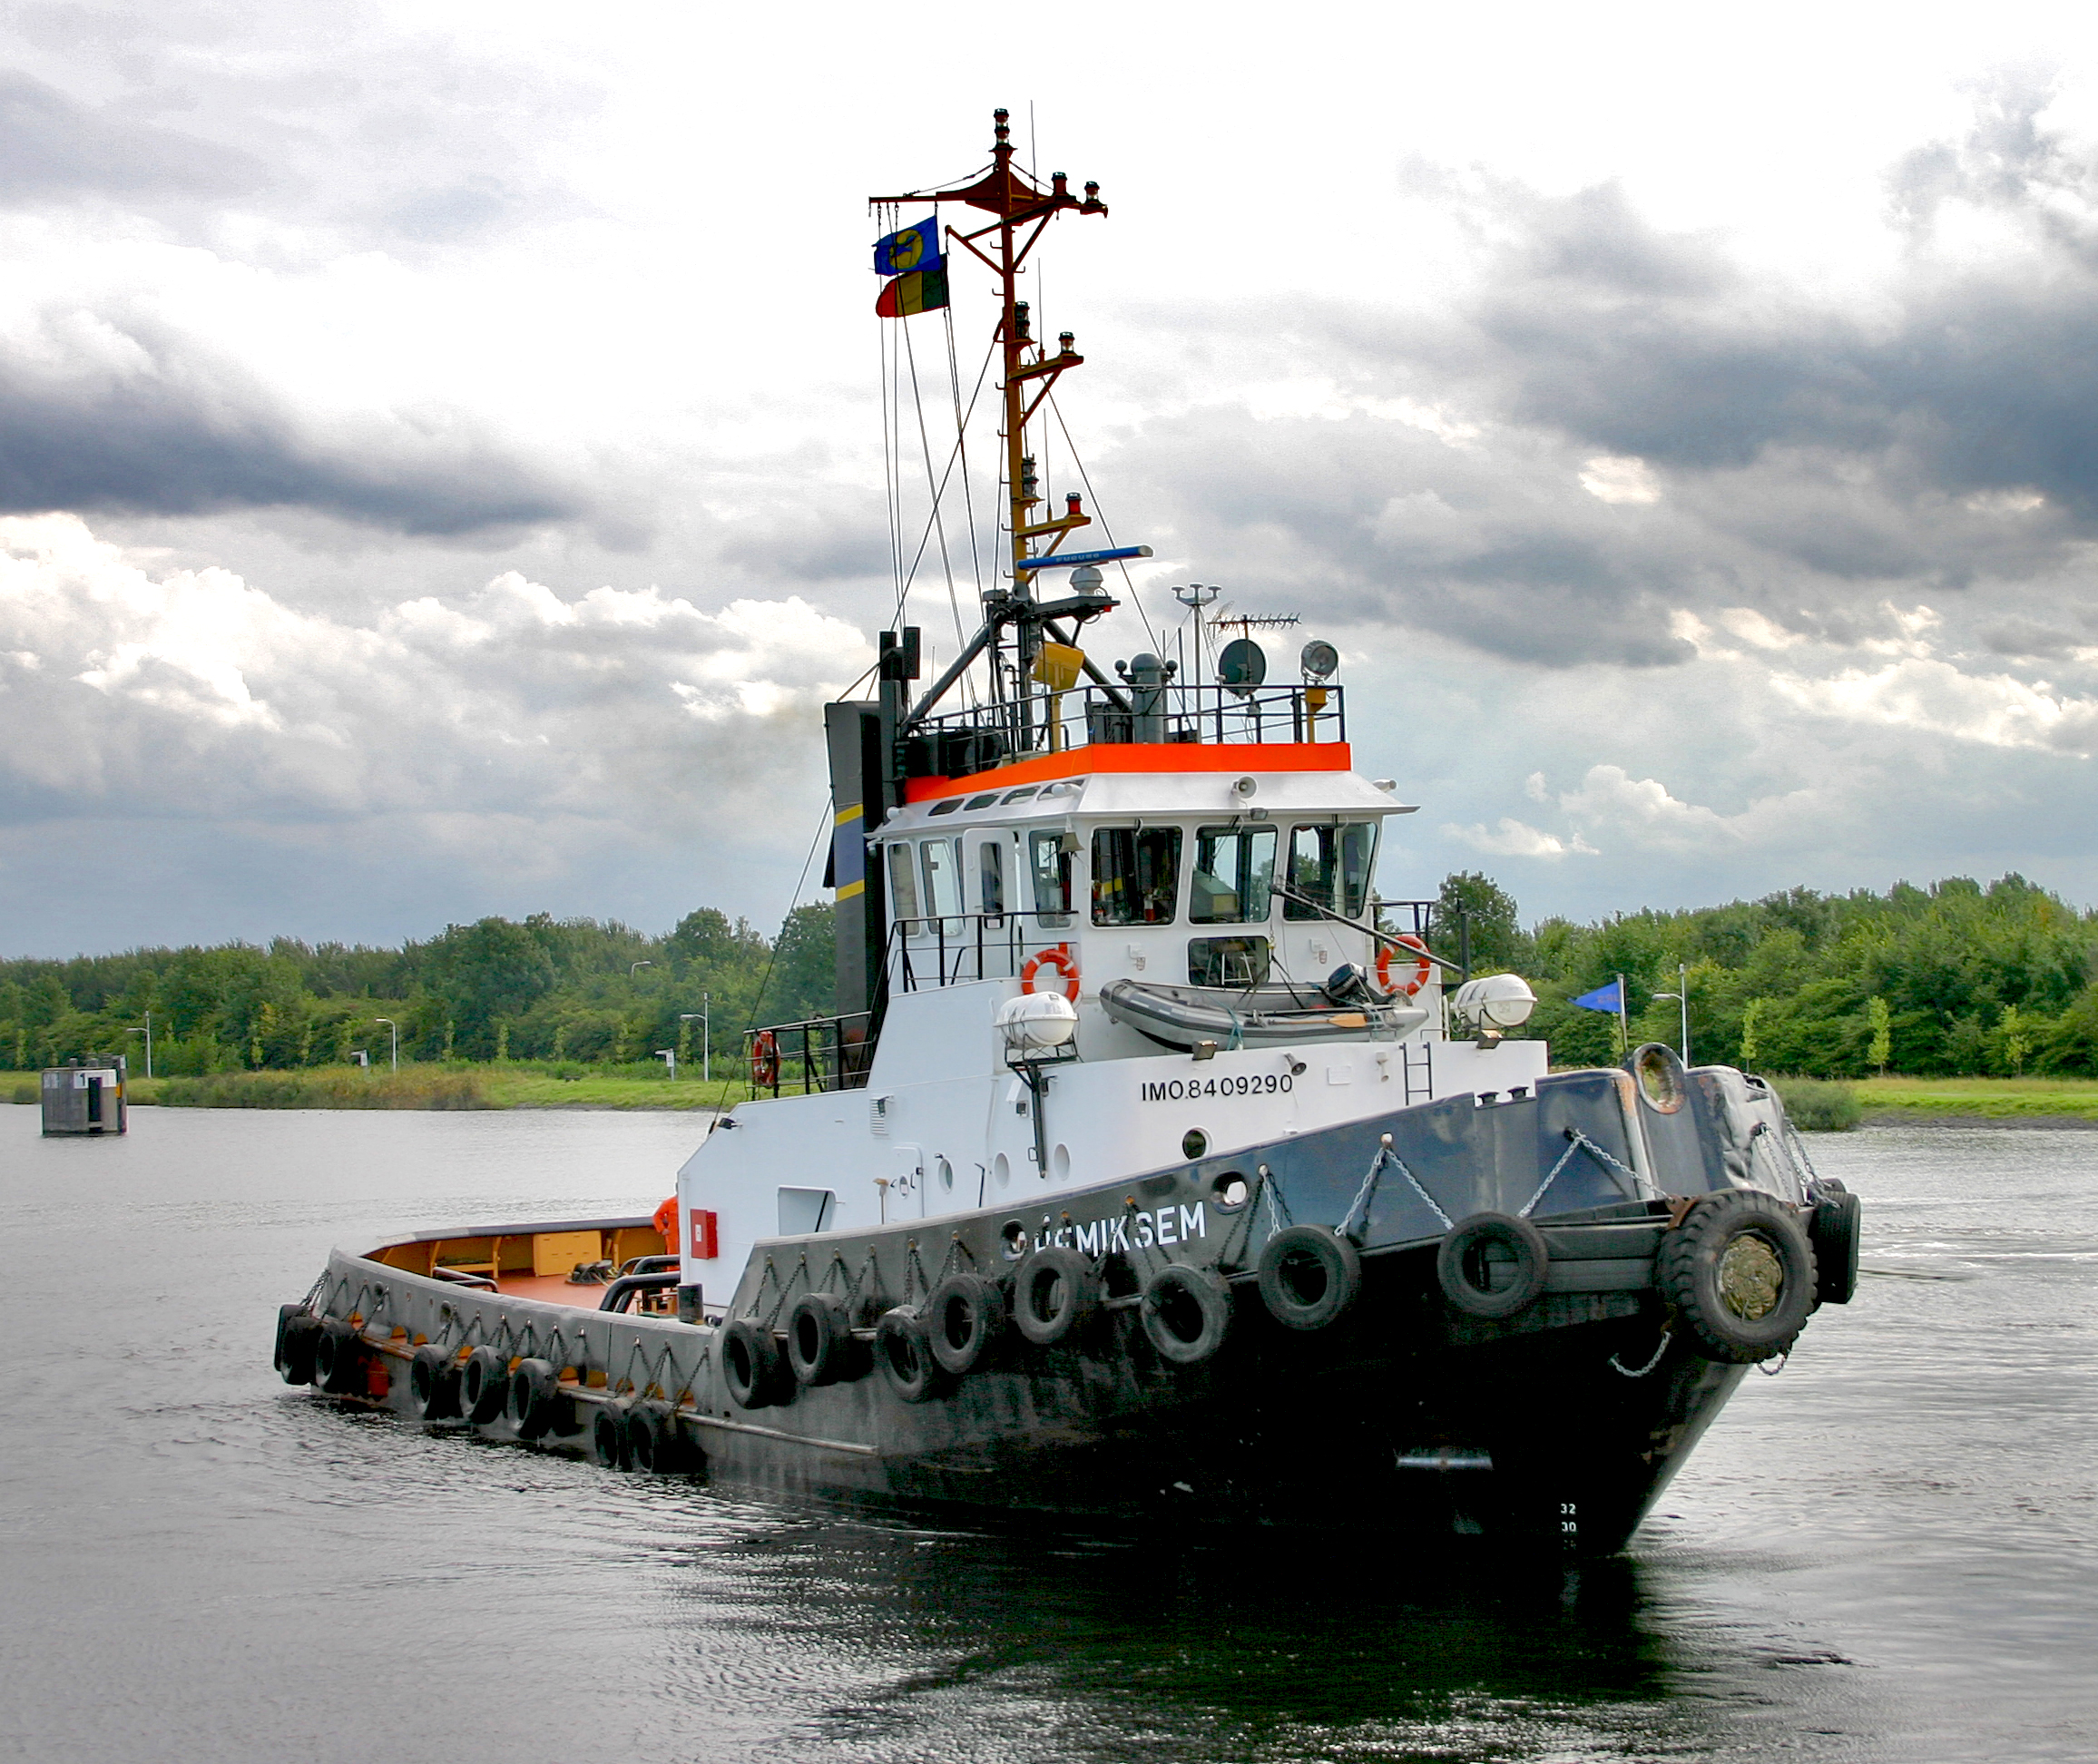 Tugboat Backgrounds, Compatible - PC, Mobile, Gadgets| 2312x1944 px